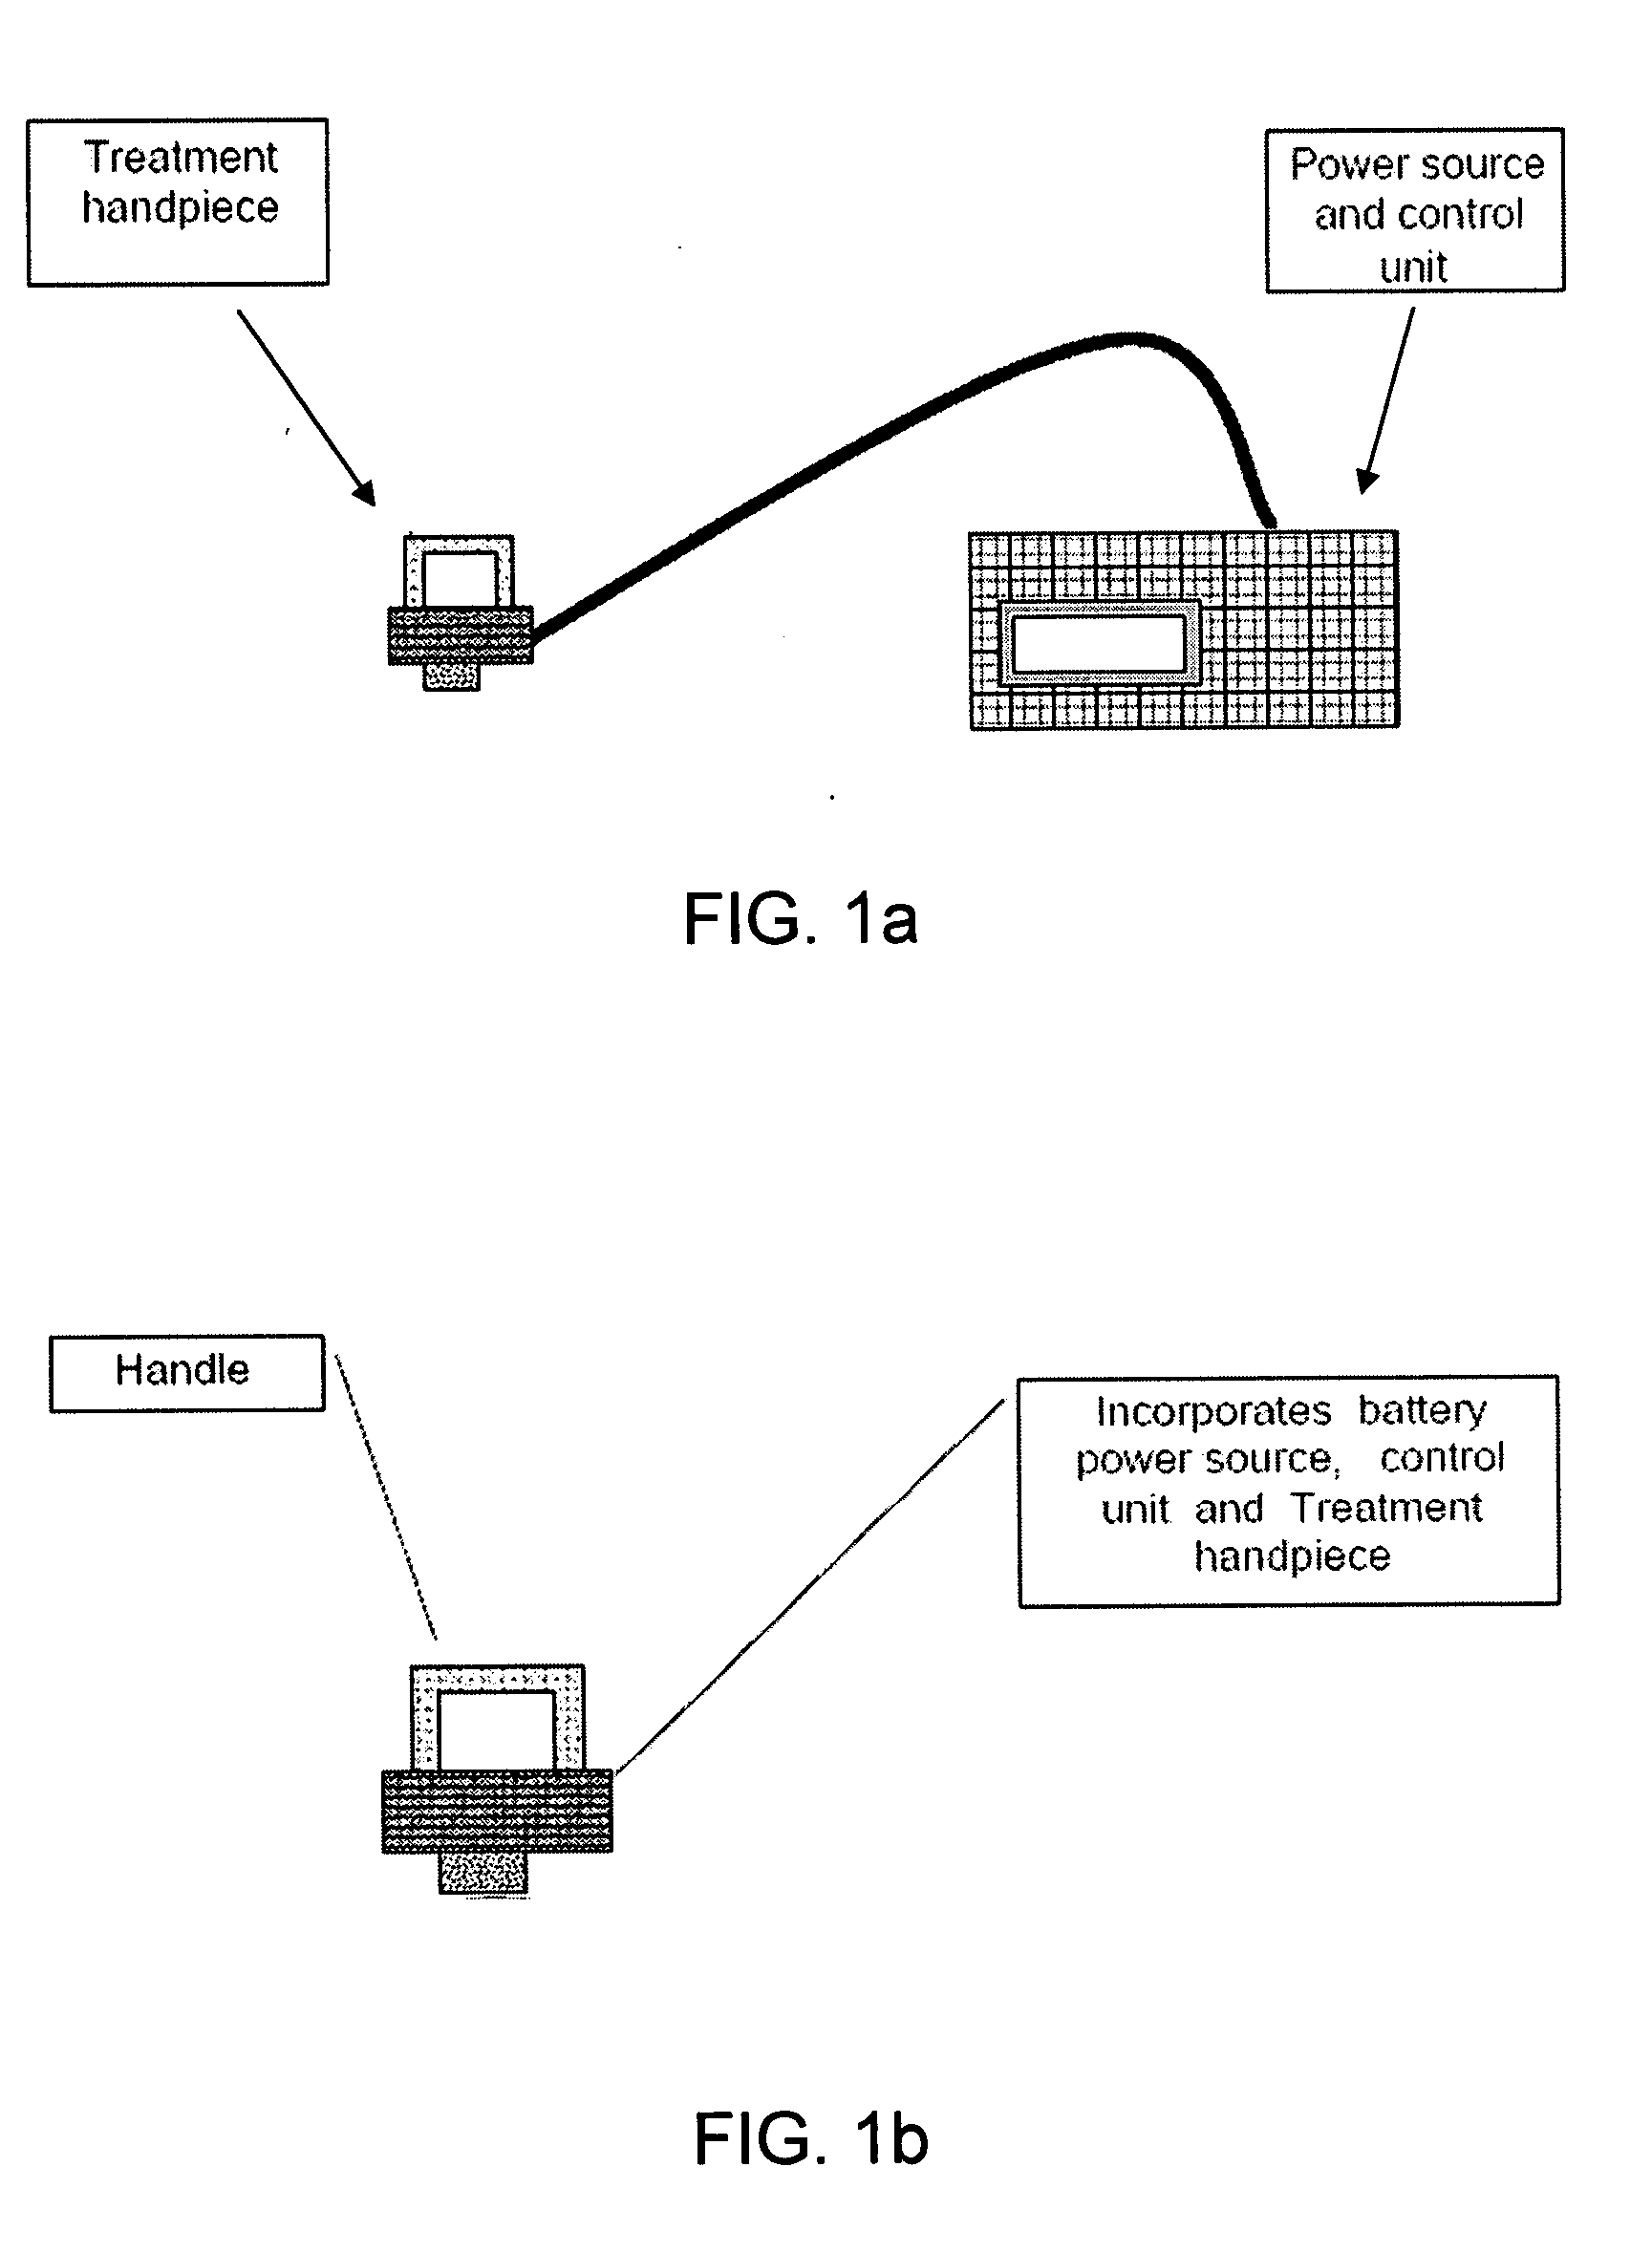 Electrosurgical methods and devices employing phase-controlled radiofrequency energy